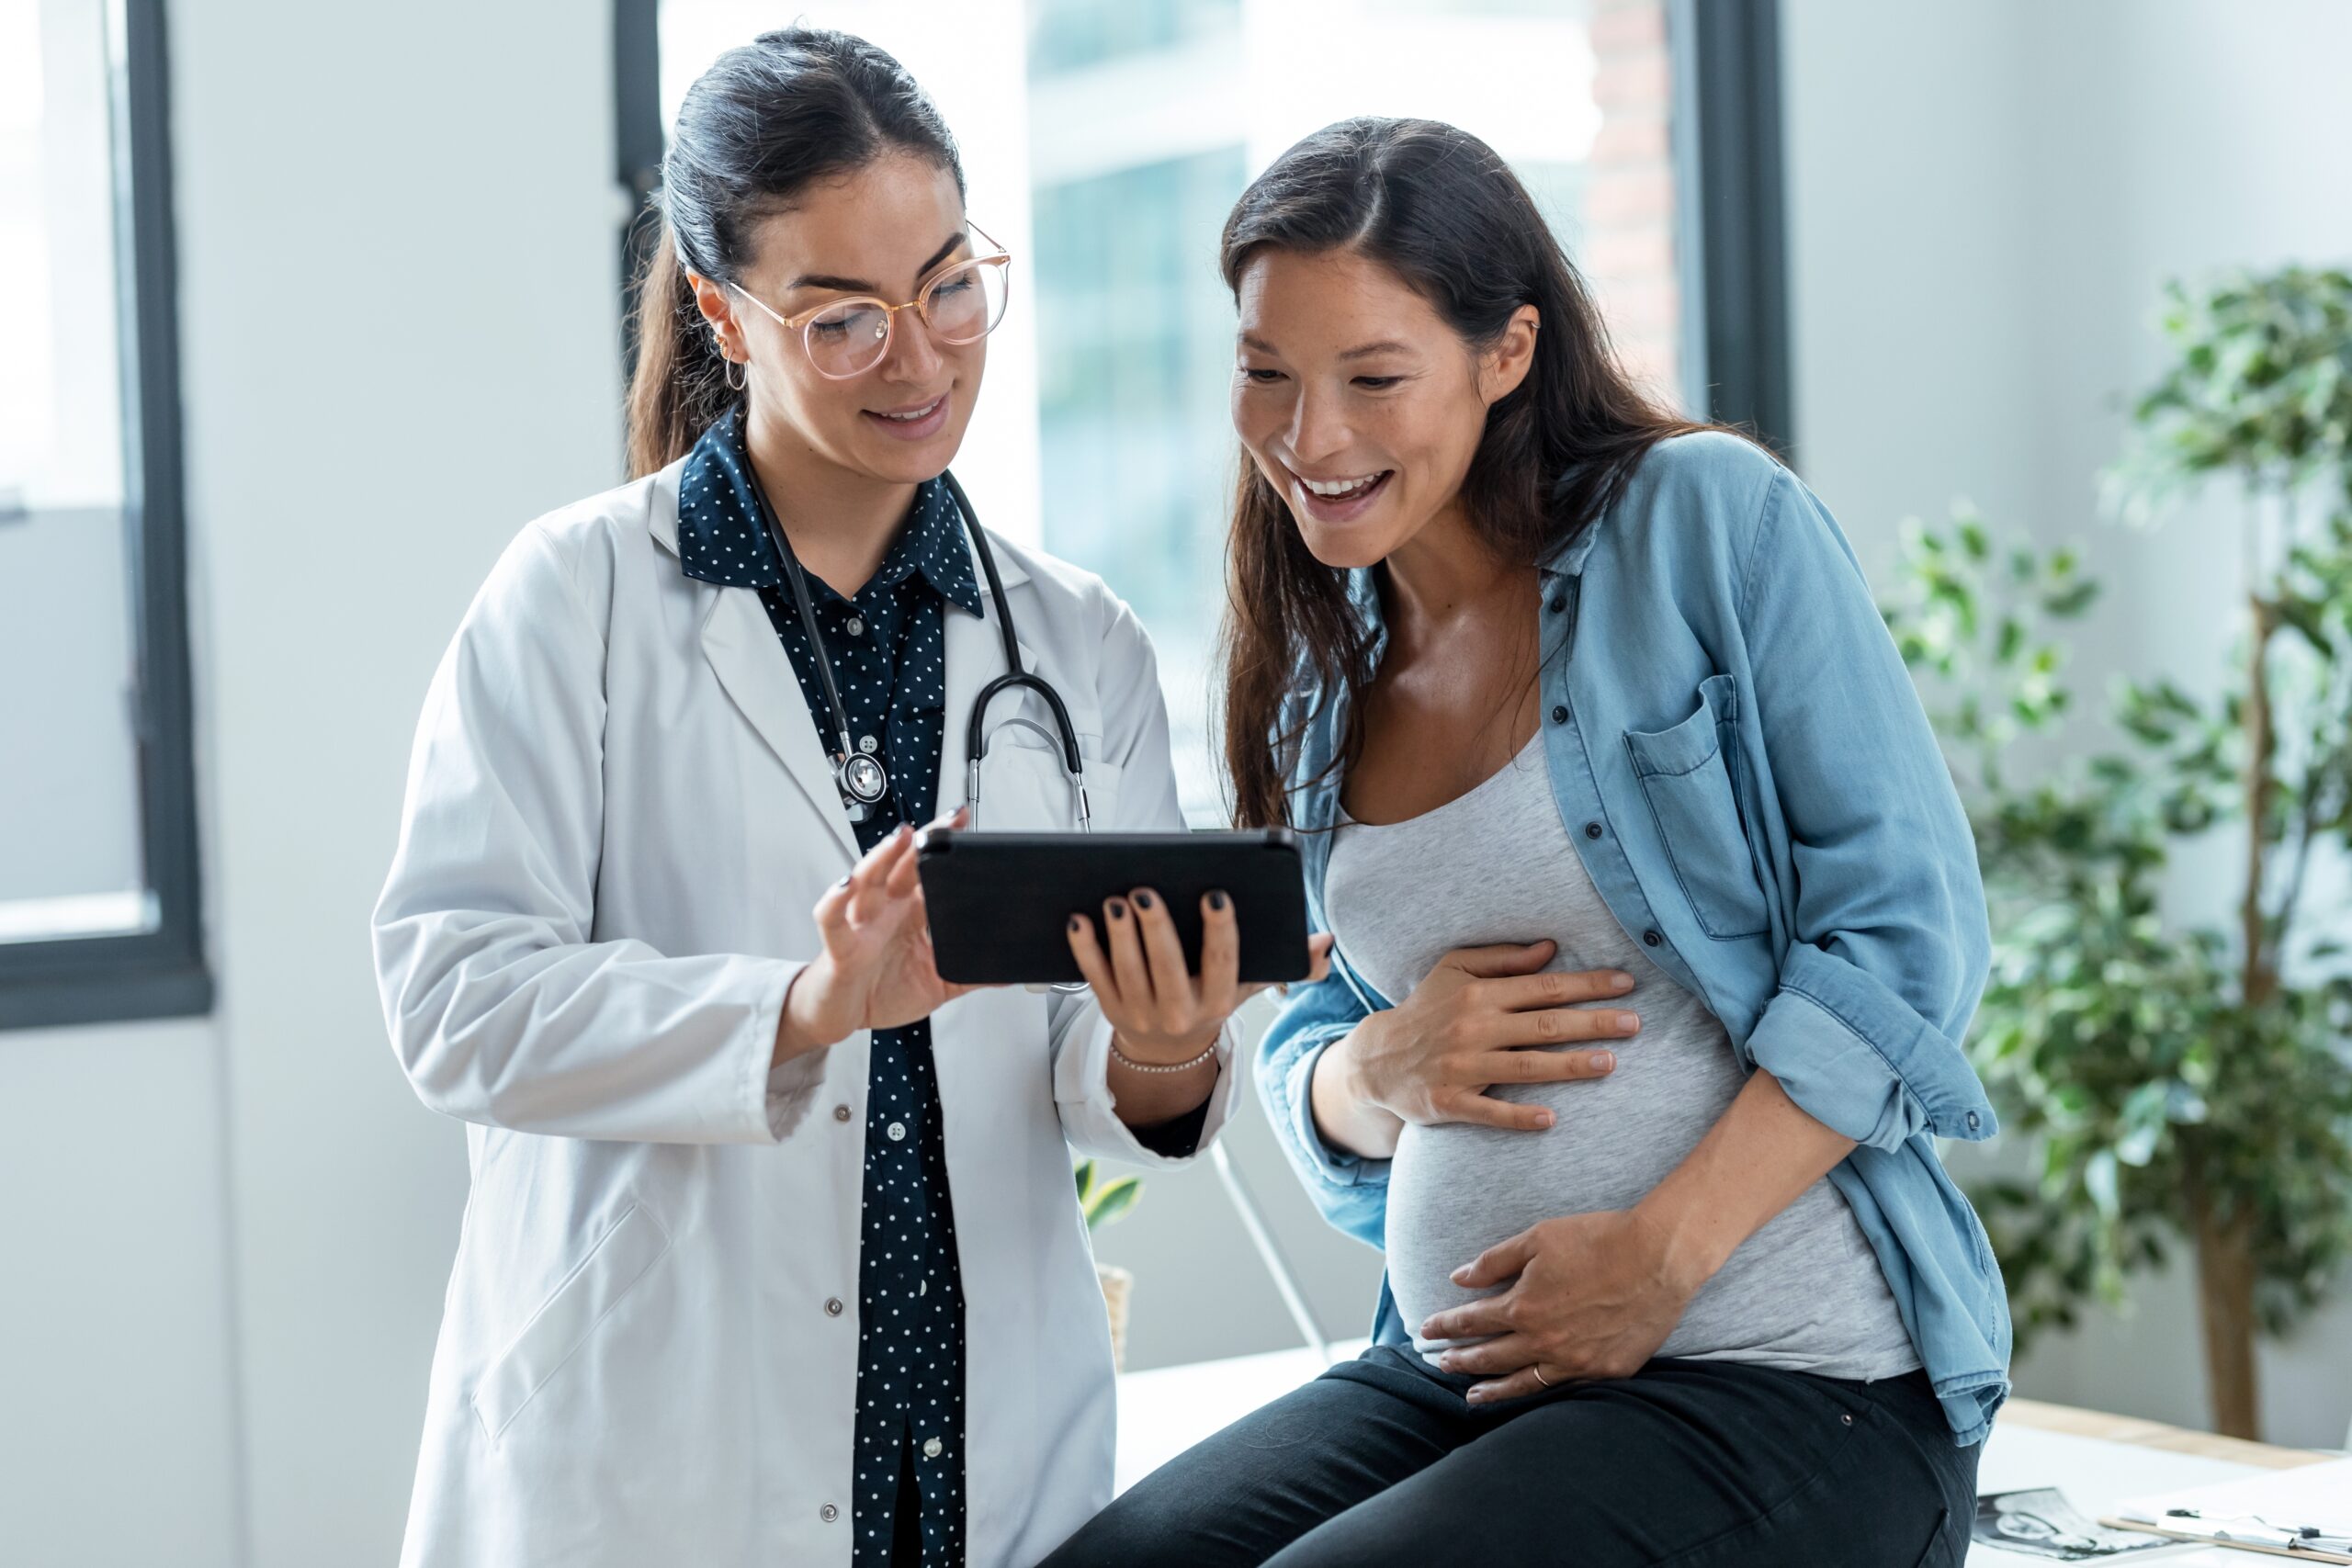 Doctor consulting with a pregnant woman about medical equipment options on a digital tablet.